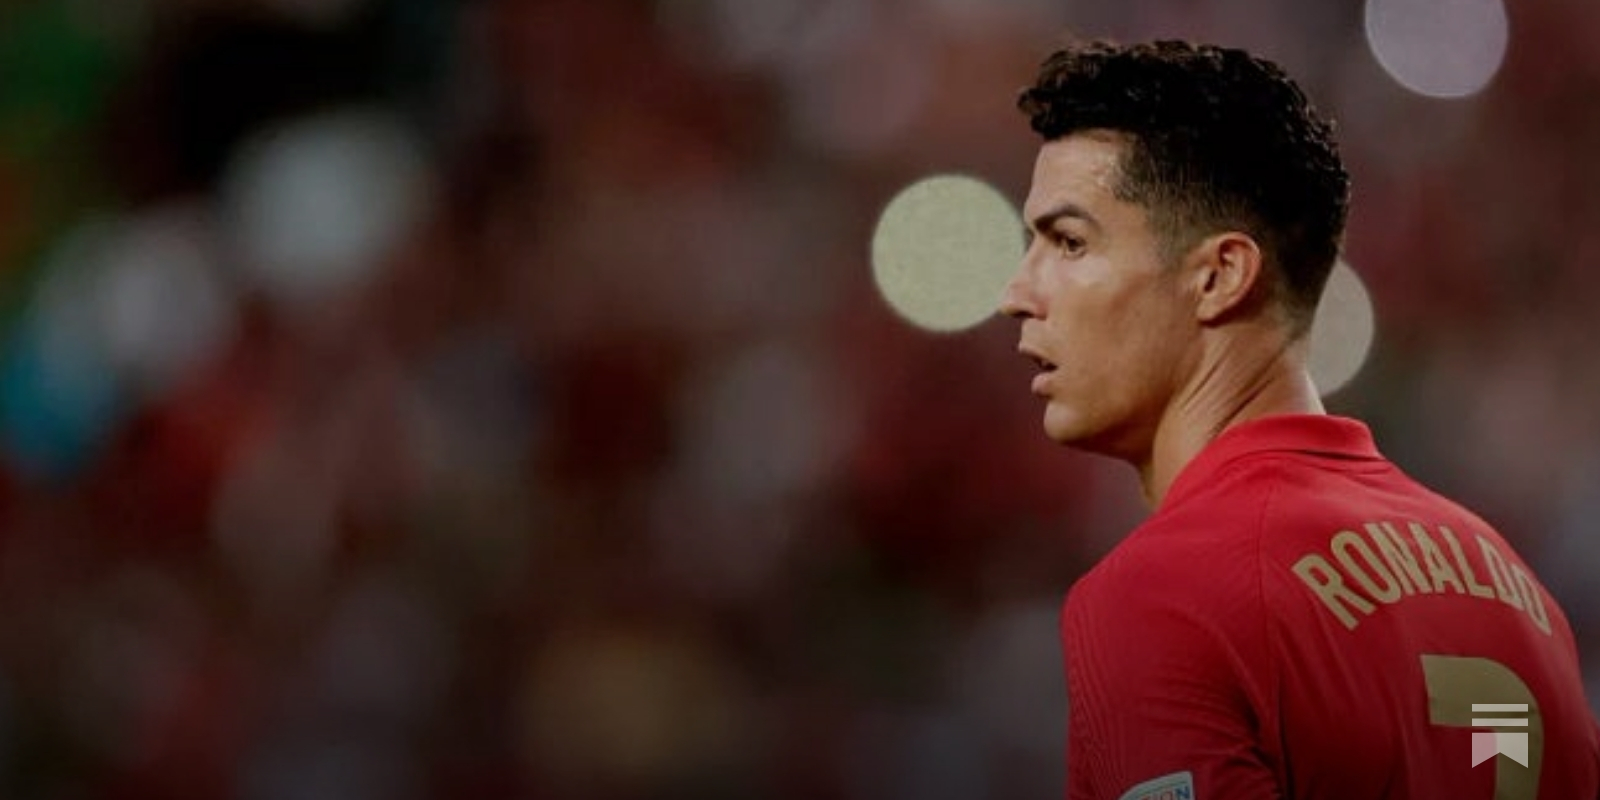 Cristiano Ronaldo tells his fans they 'don't have to hate Lionel